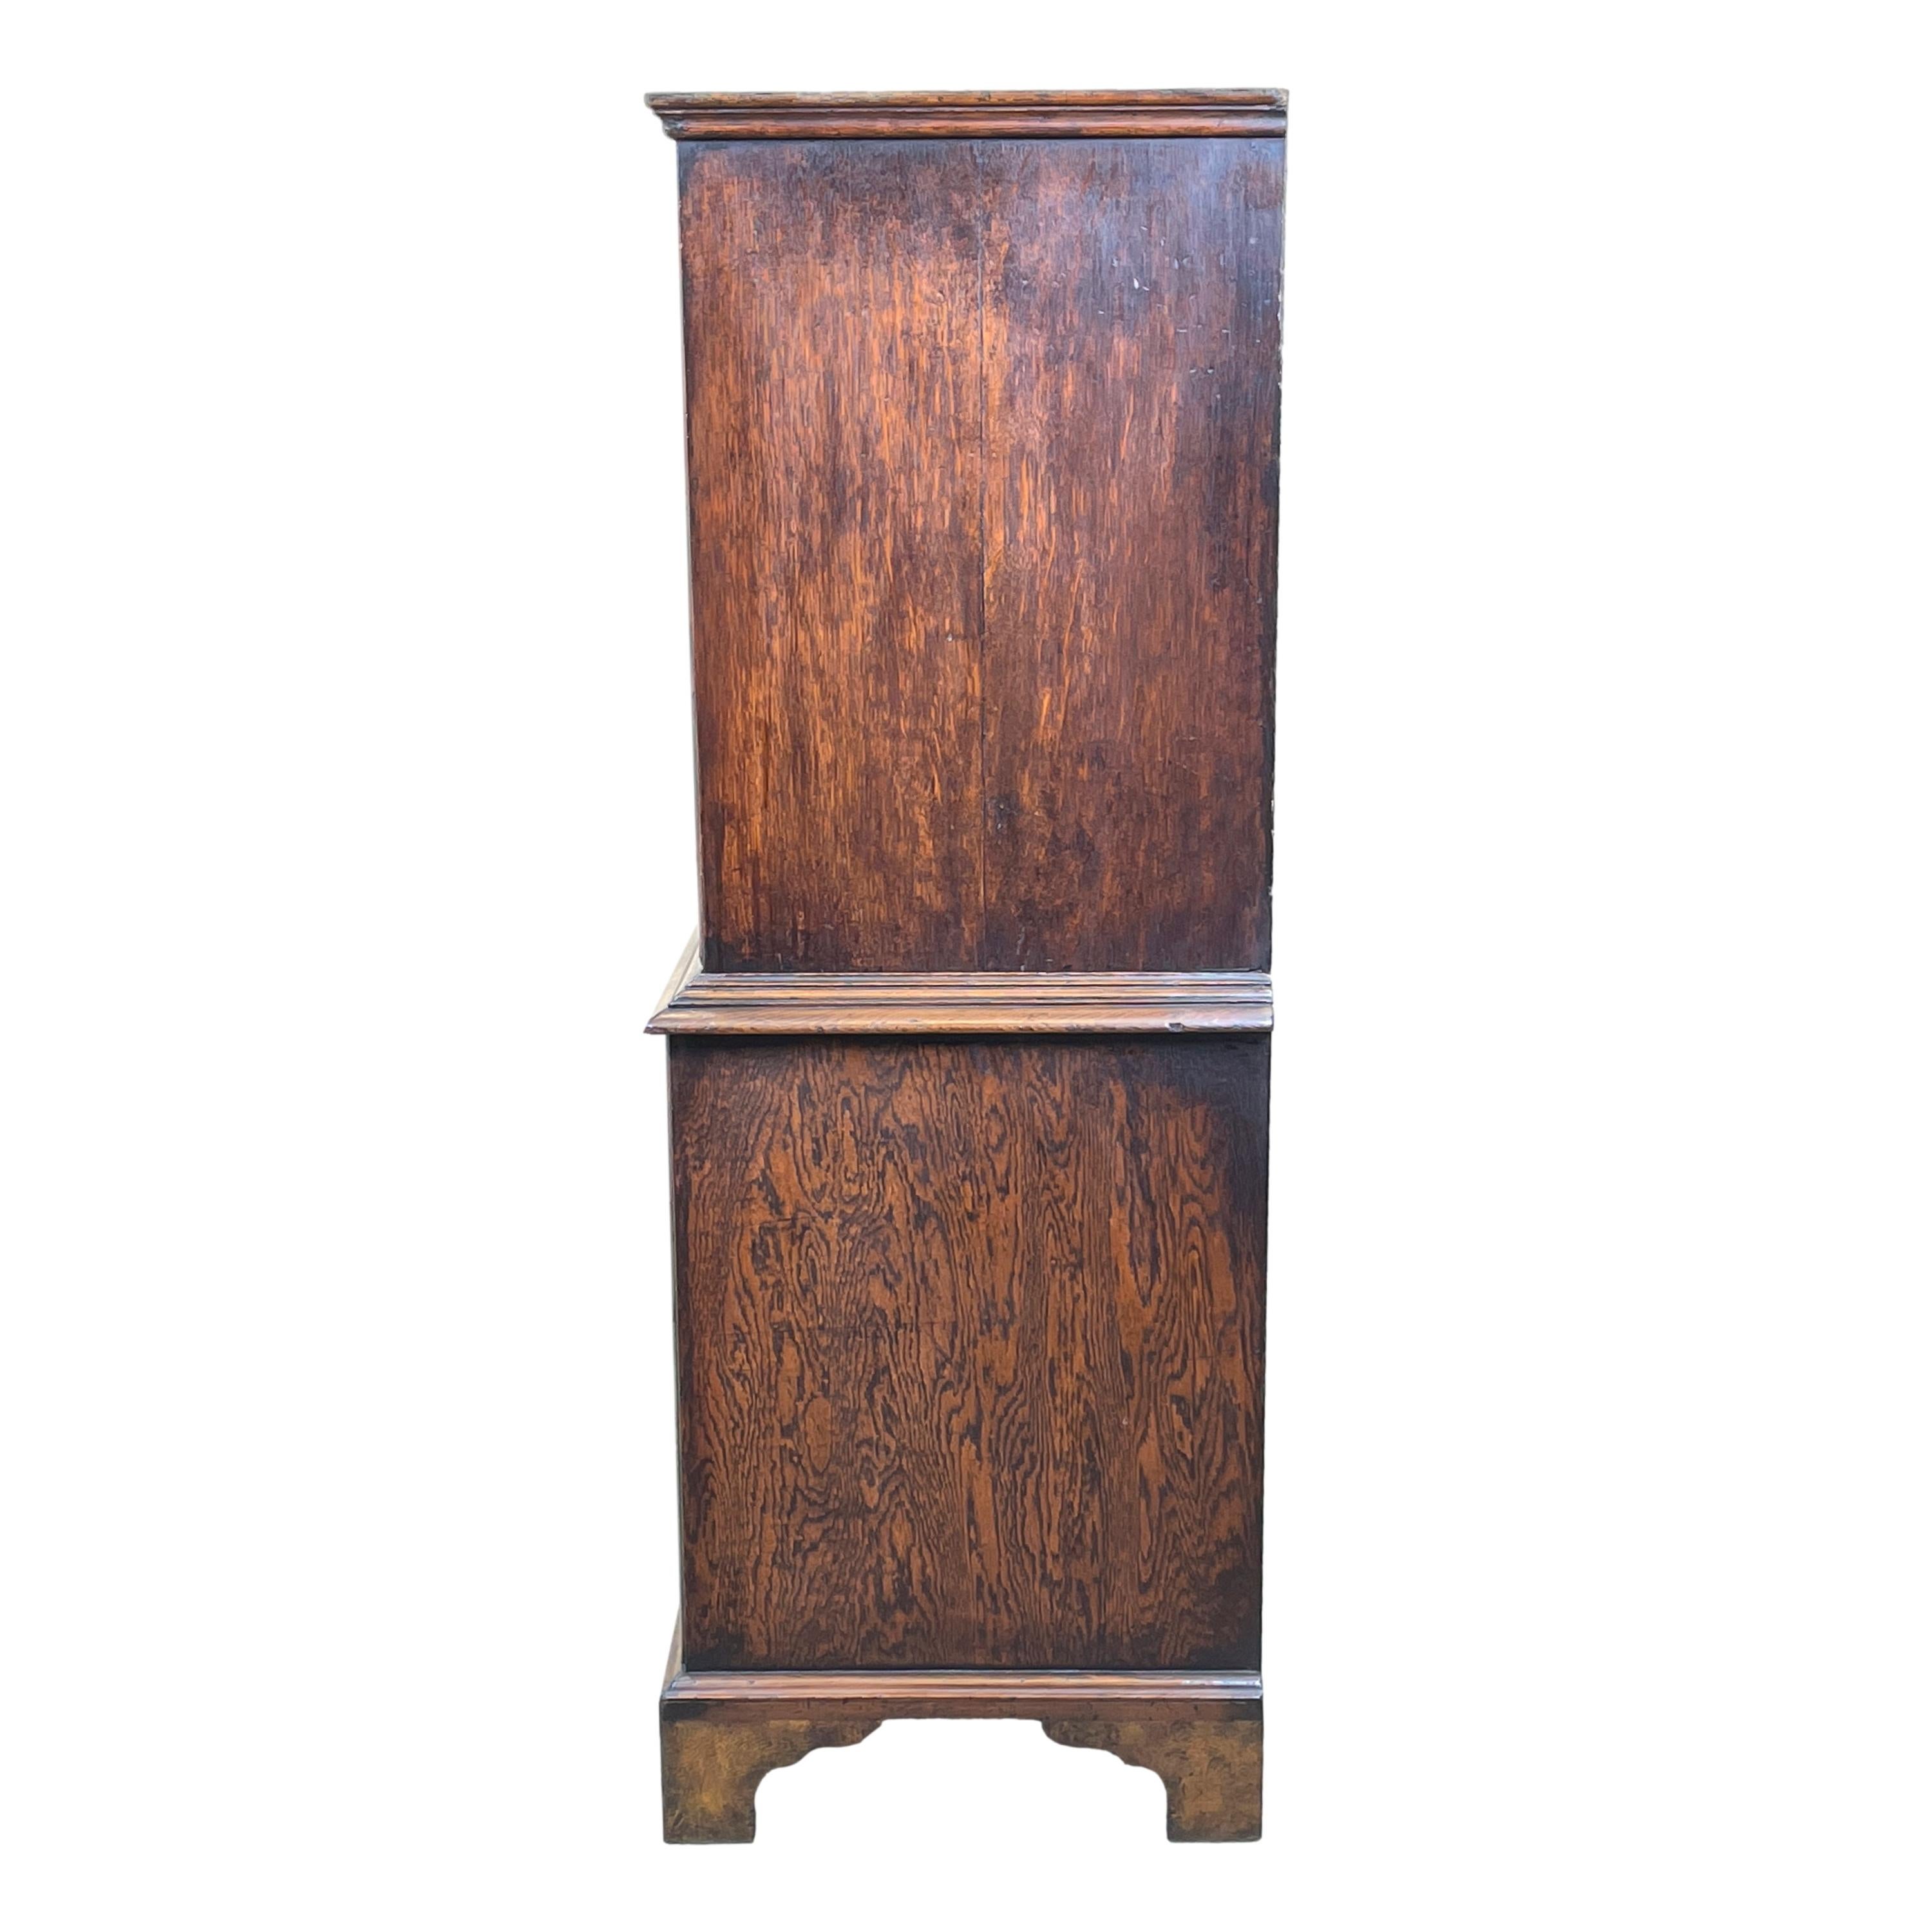 A charming early 18th century George I period walnut tallboy, or chest on chest, of extremely rare small proportions having quarter veneered & cross banded top over two short & six long superbly figured & cross banded drawers with replacement brass